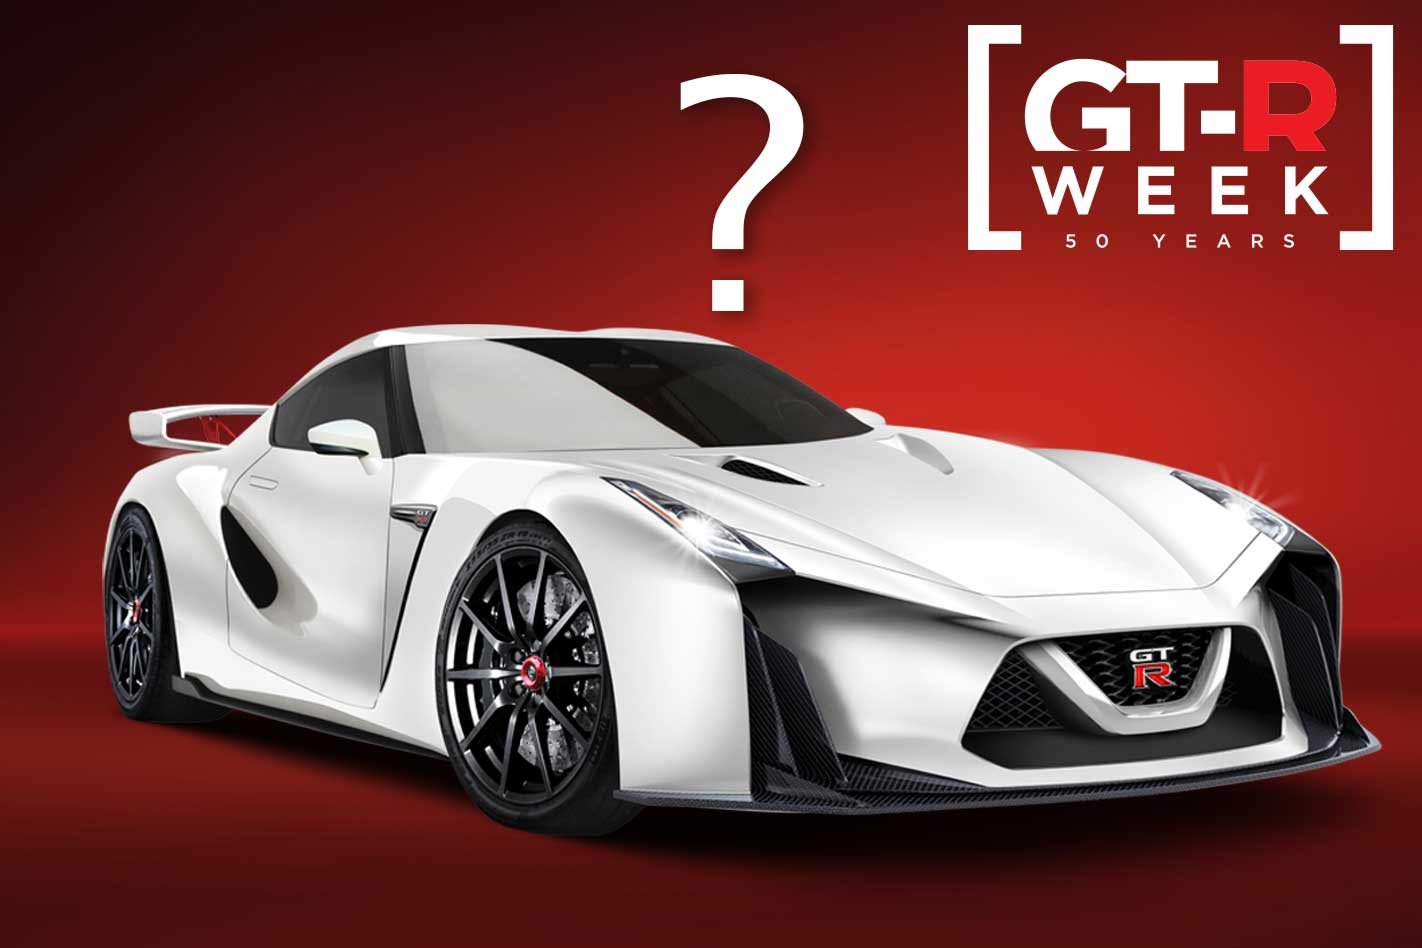 When Will Nissan Build The R36 Gt R 50 Years Of Gt R